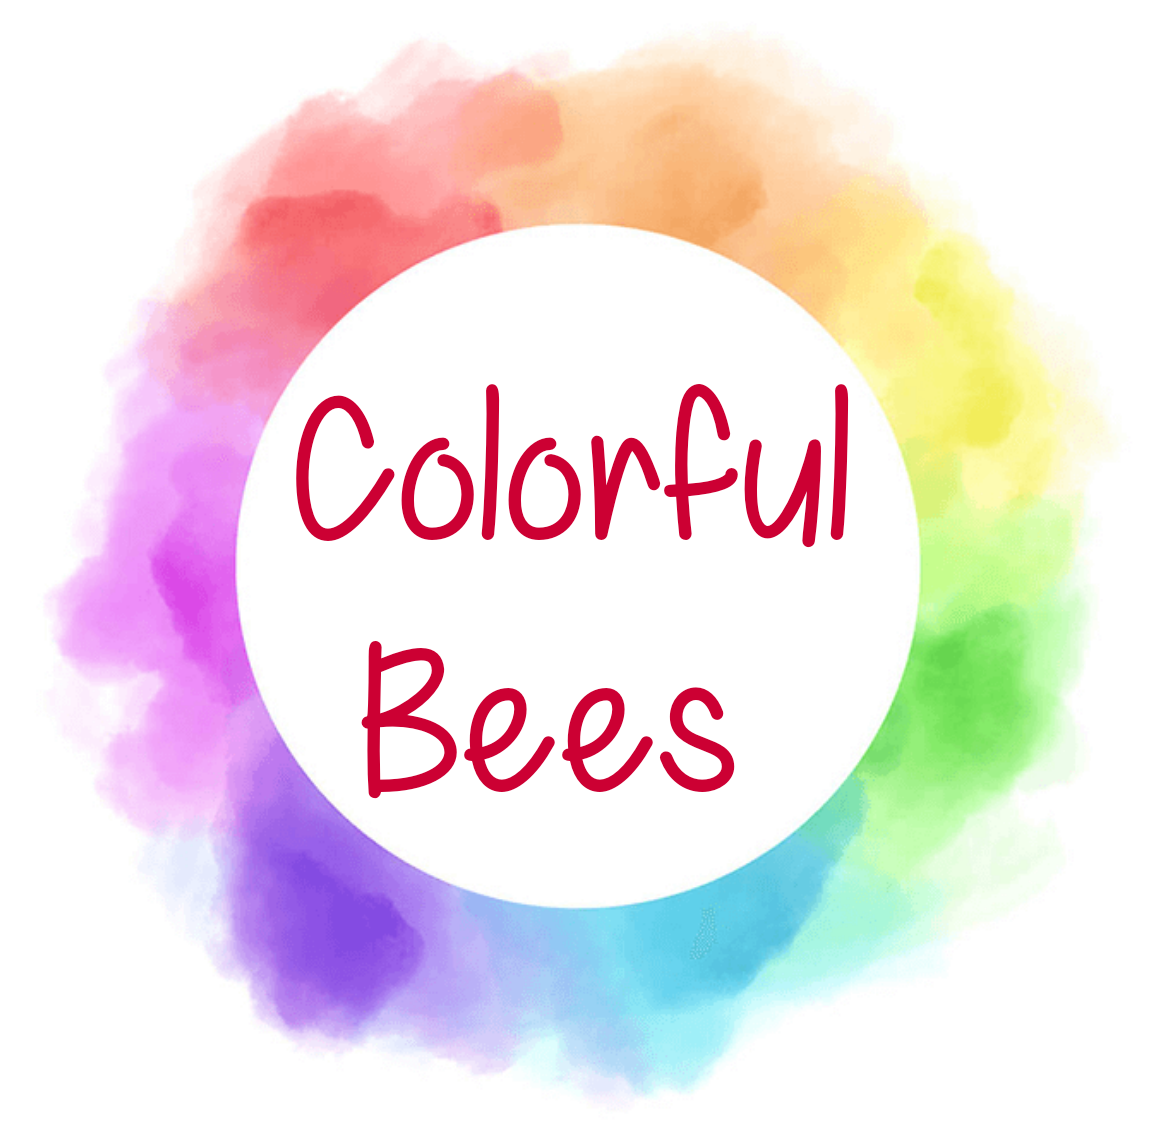 Colorful Bees